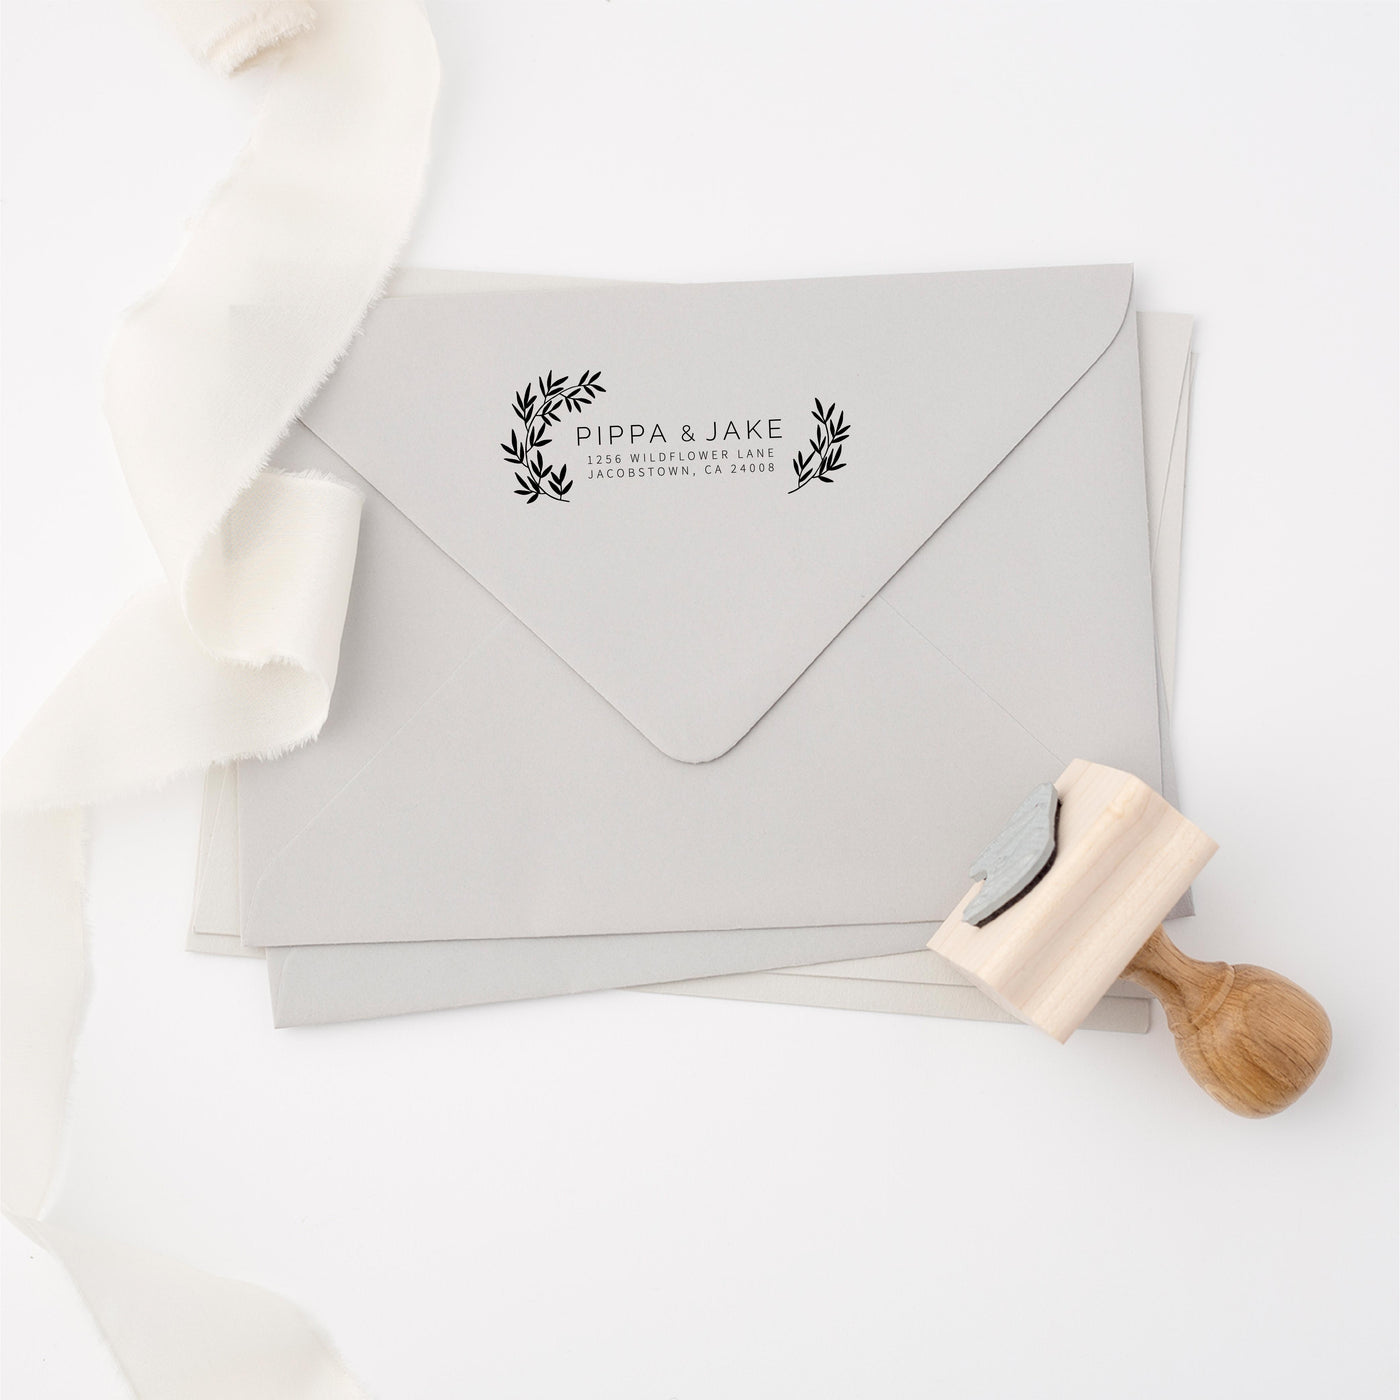 Valerie Classic Botanical Return Address Rubber Stamp | Personalised Rubber Stamp with Wooden Handle for Fine Art Wedding Stationery Invitation Envelope | Heirloom Seals